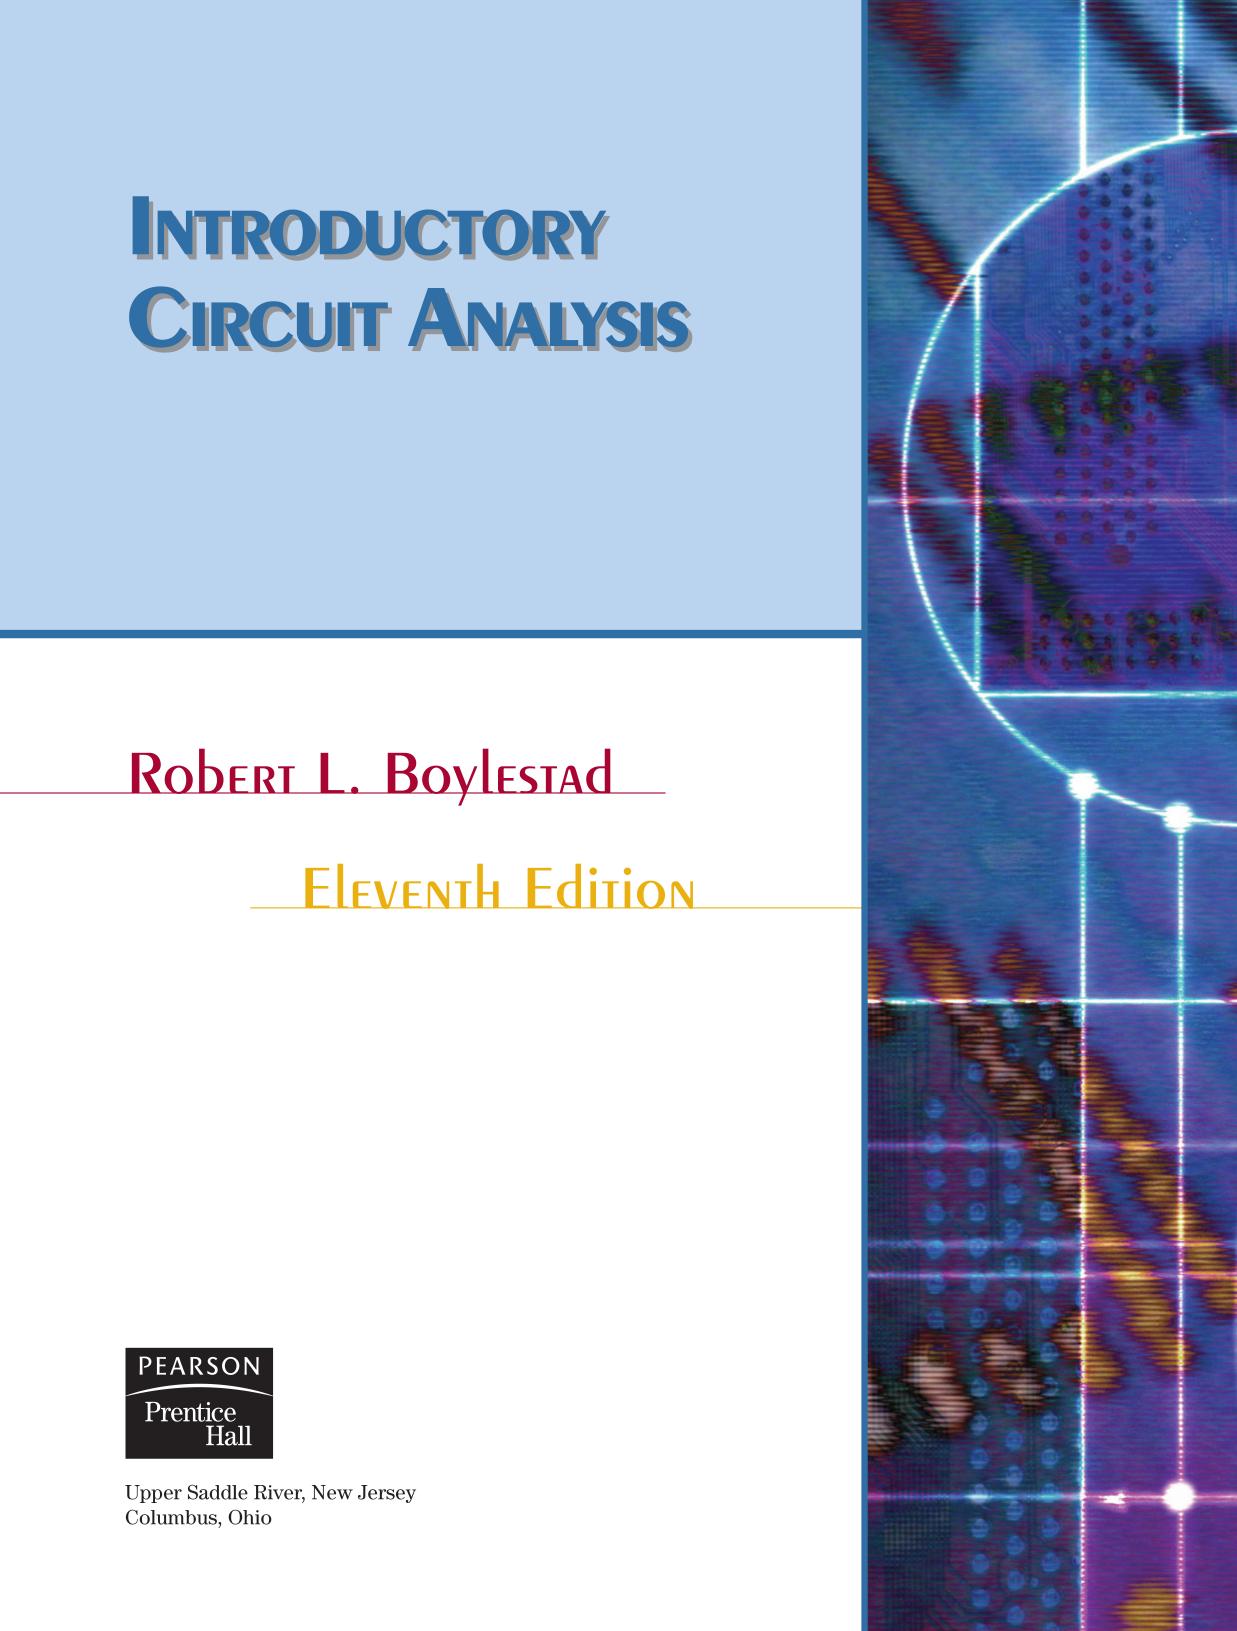 Introductory Circuit Analysis (11th Edition) by Robert L. Boylestad.pdf